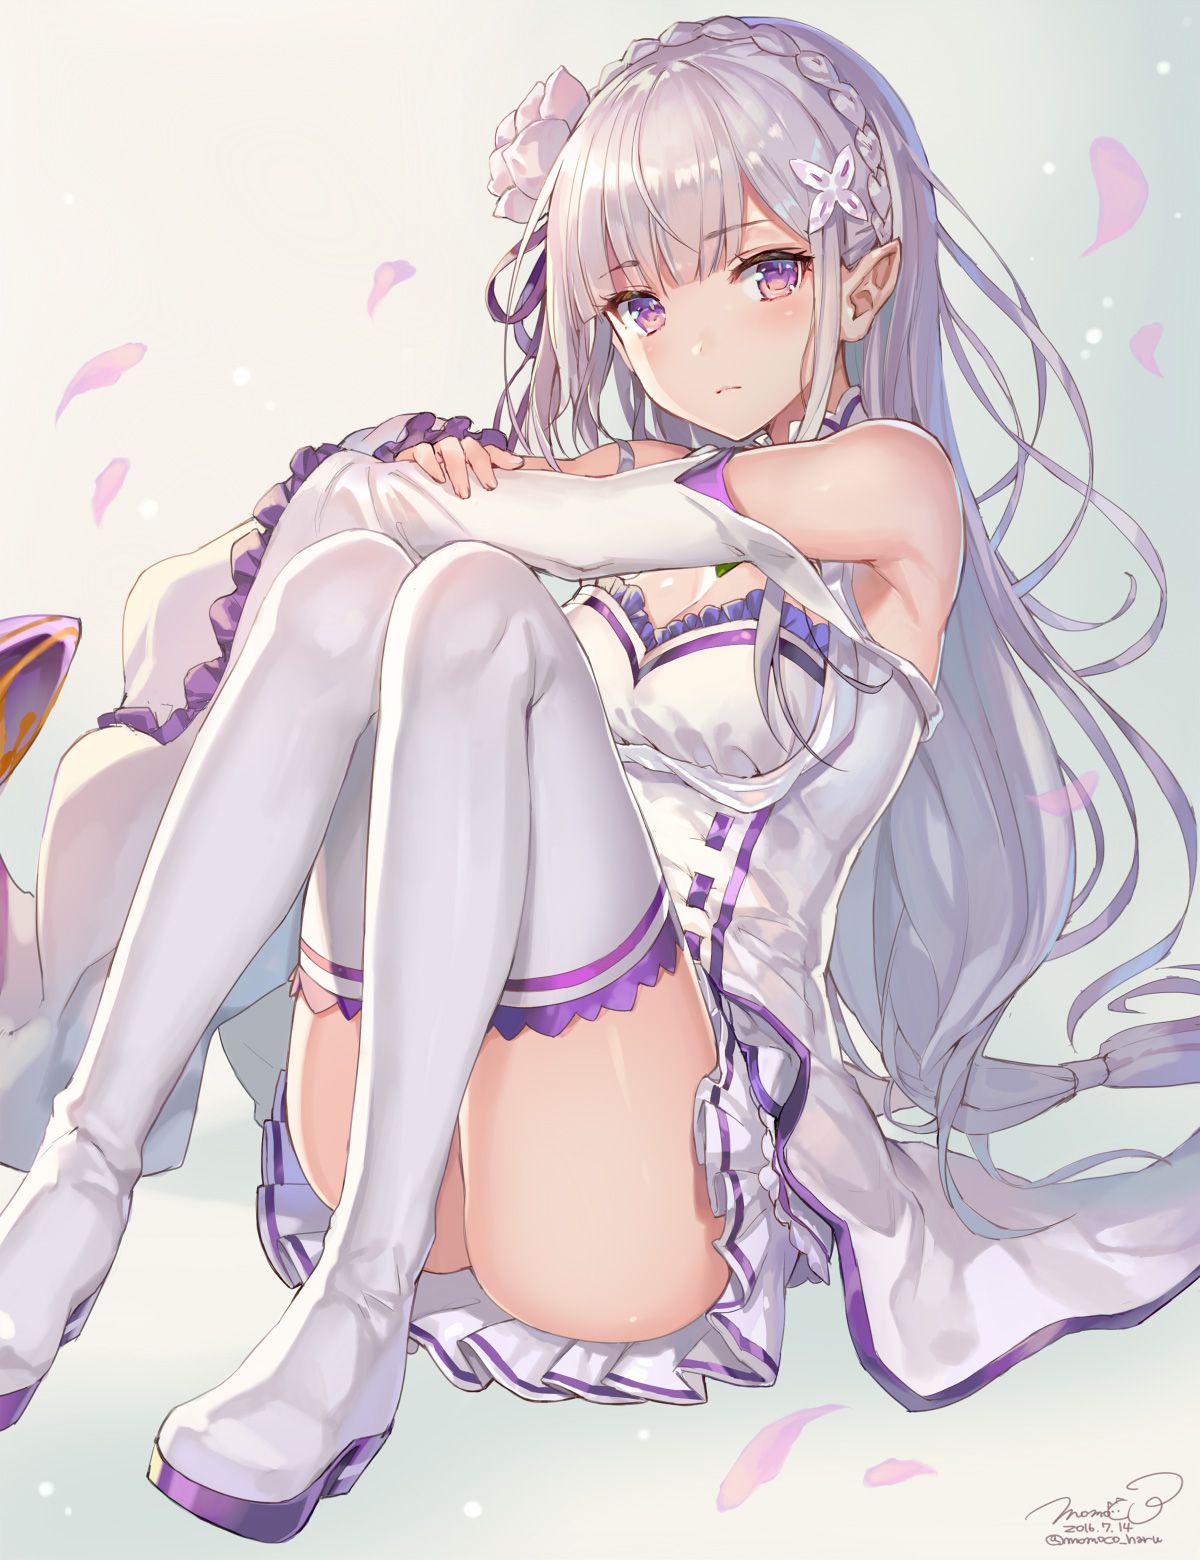 Secondary image of a silver-haired girl that 4 50 photos [Ero/non-erotic] 23